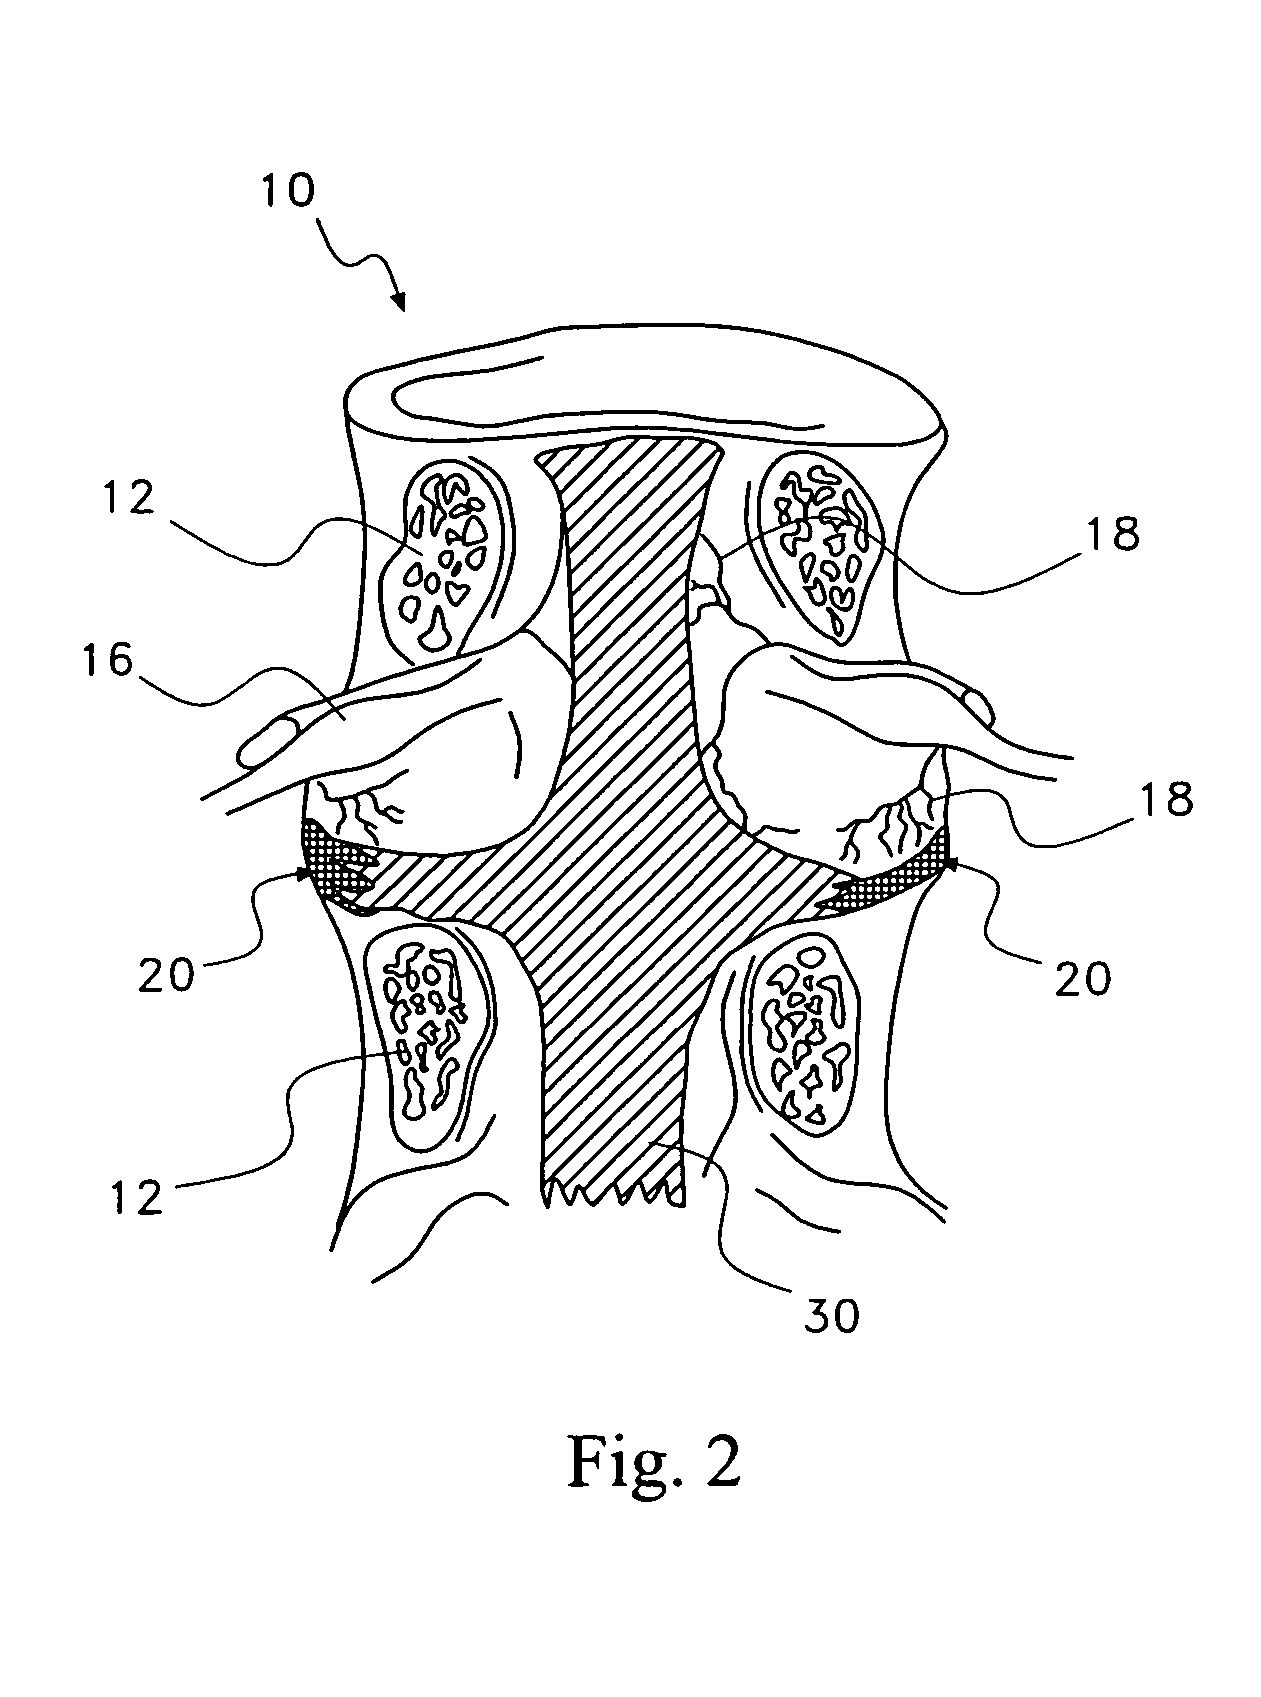 Pharmaceutical removal of vascular and/or neuronal extensions form a degenerating disc